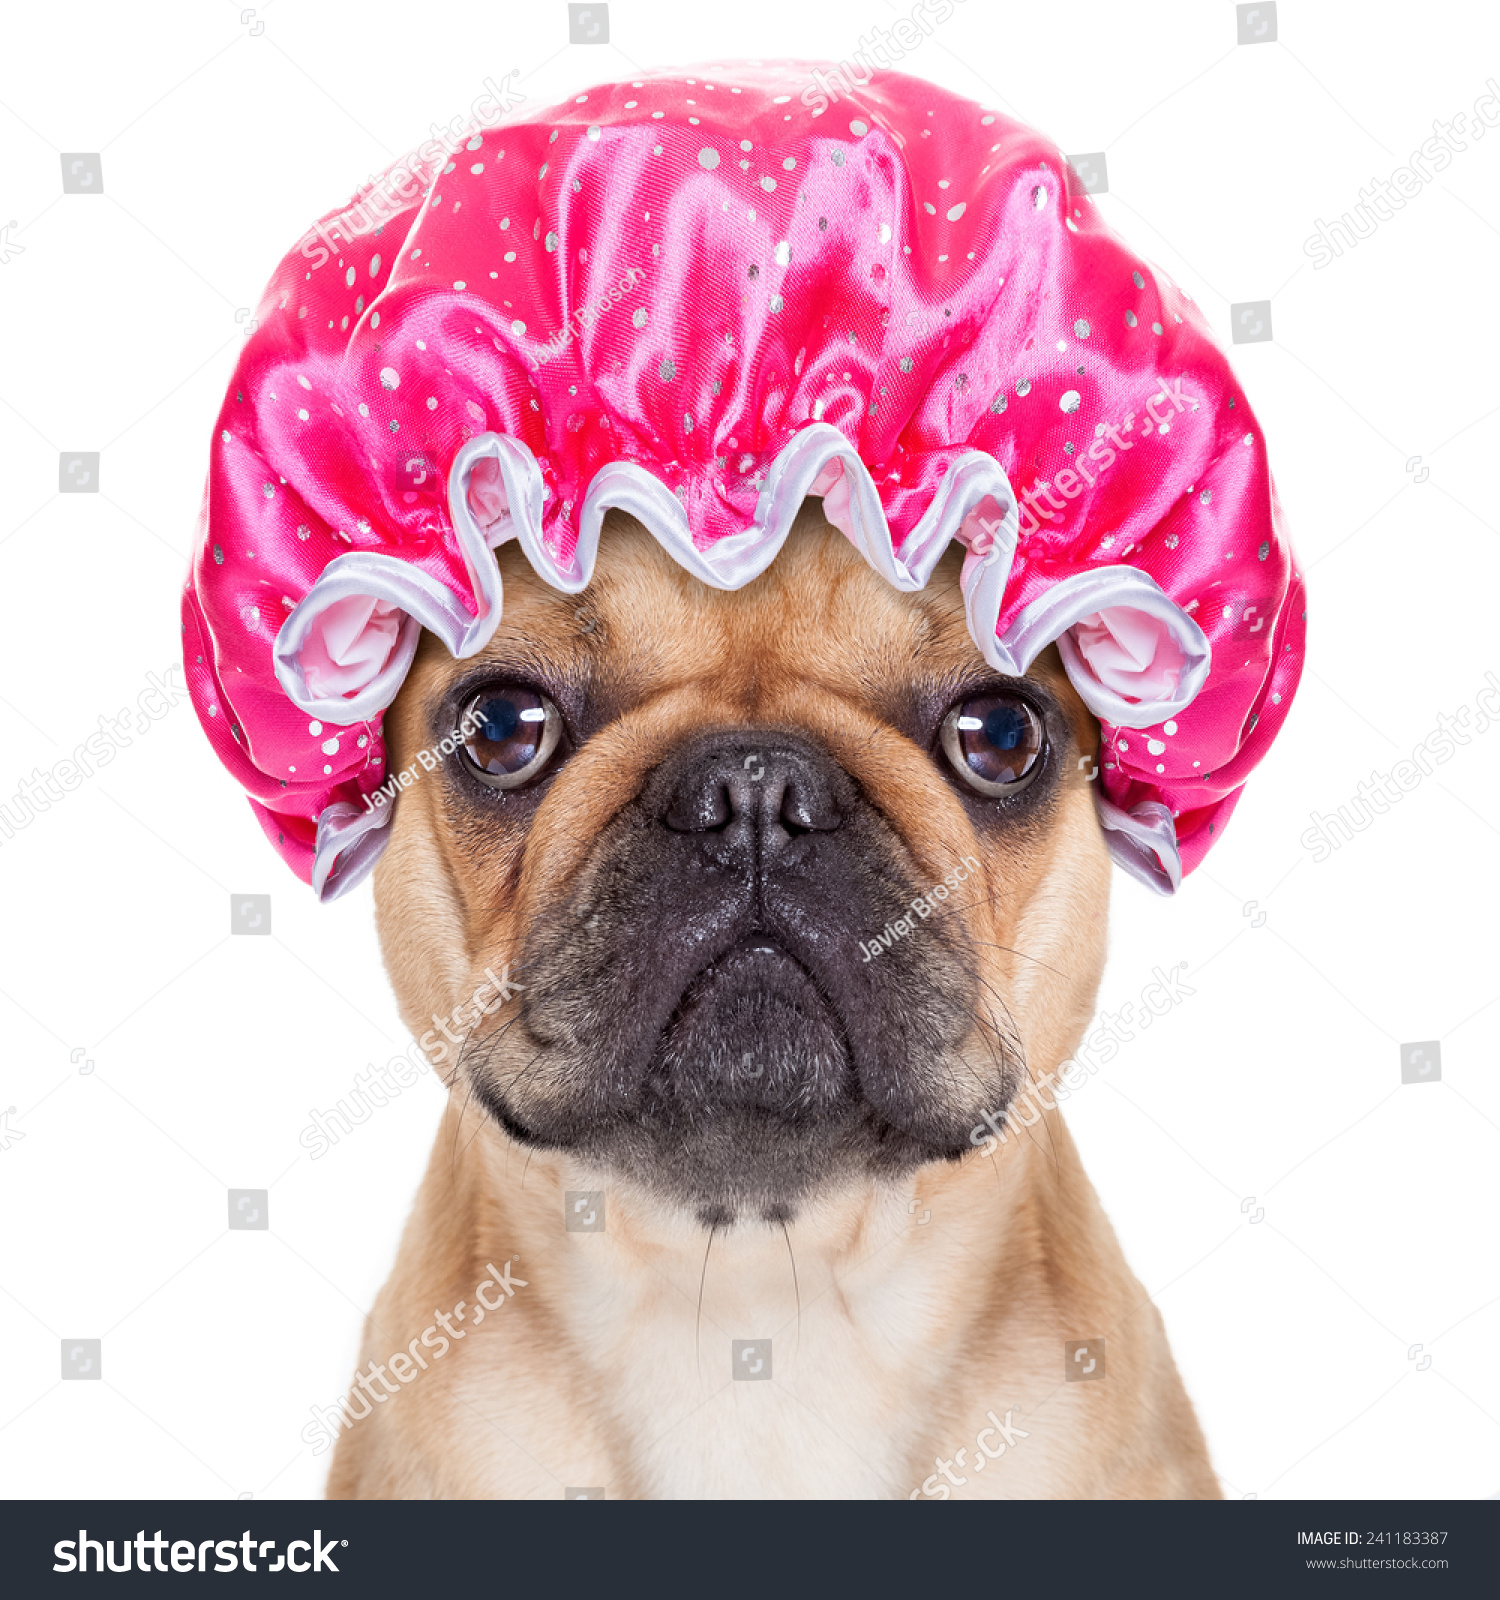 french bulldog dog ready to have a bath or a shower wearing a bathing cap, isolated on white background #241183387